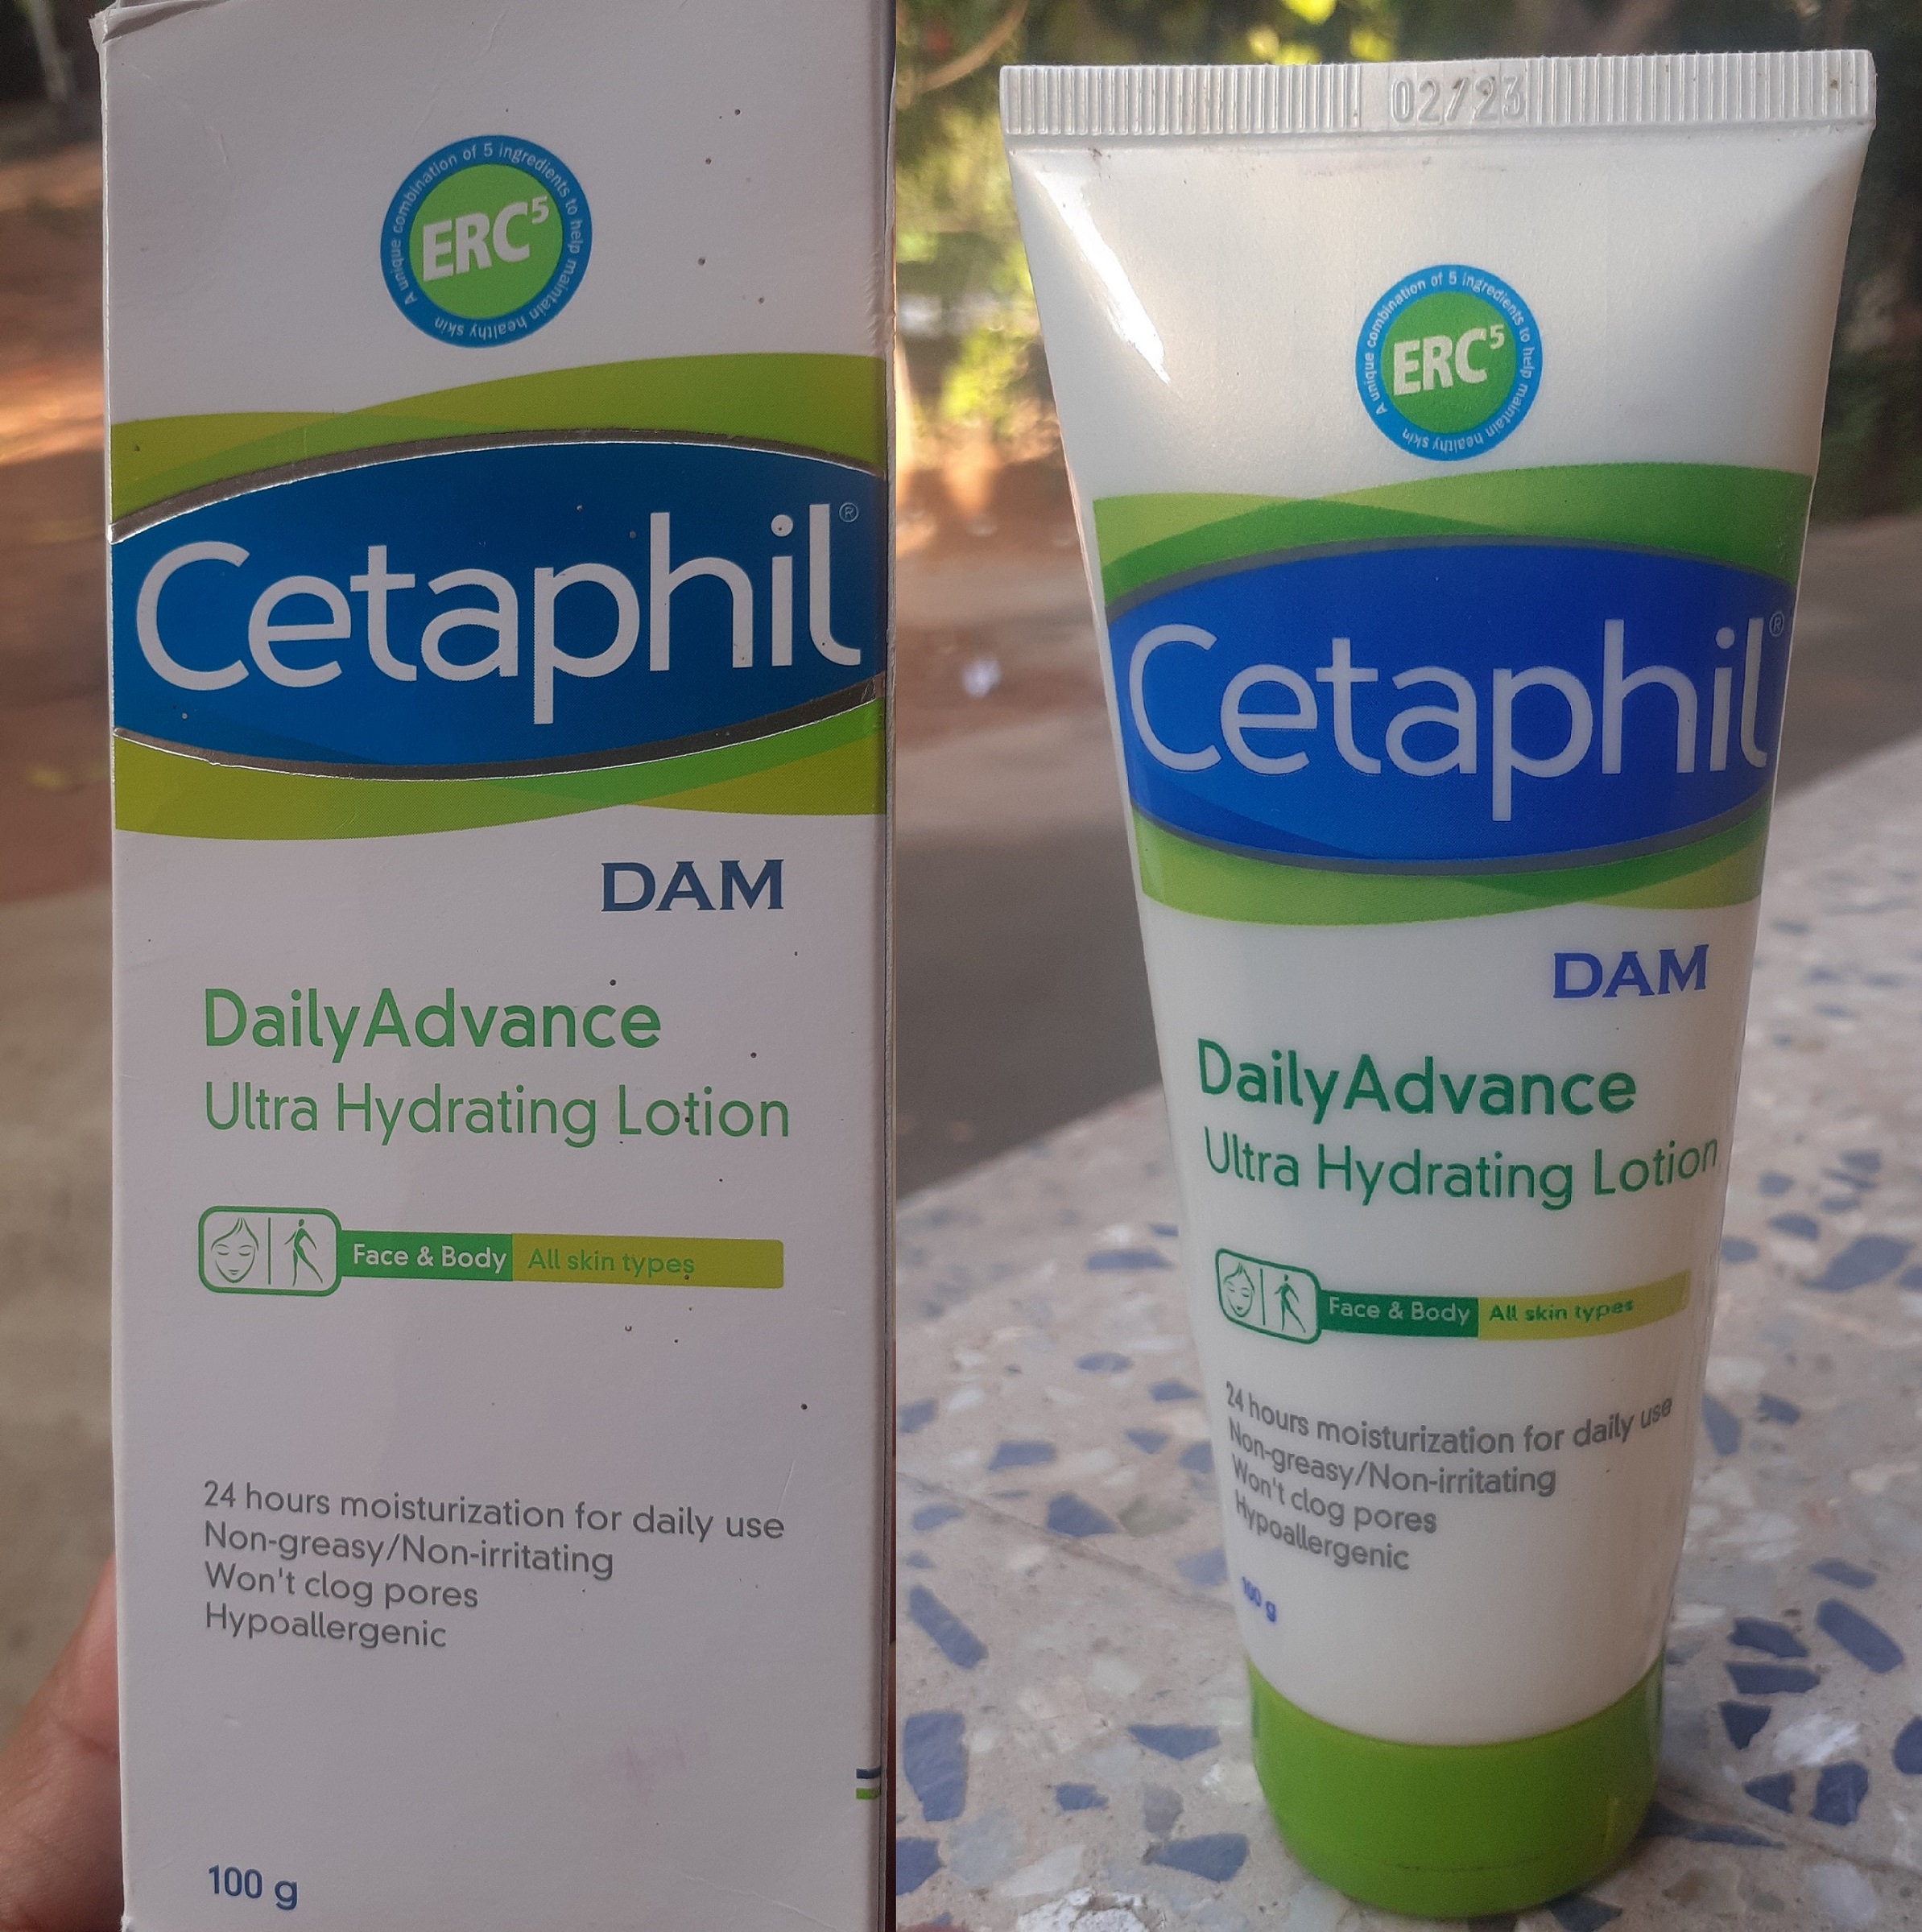 Cetaphil DAM Daily Advance Ultra Hydrating Lotion Review